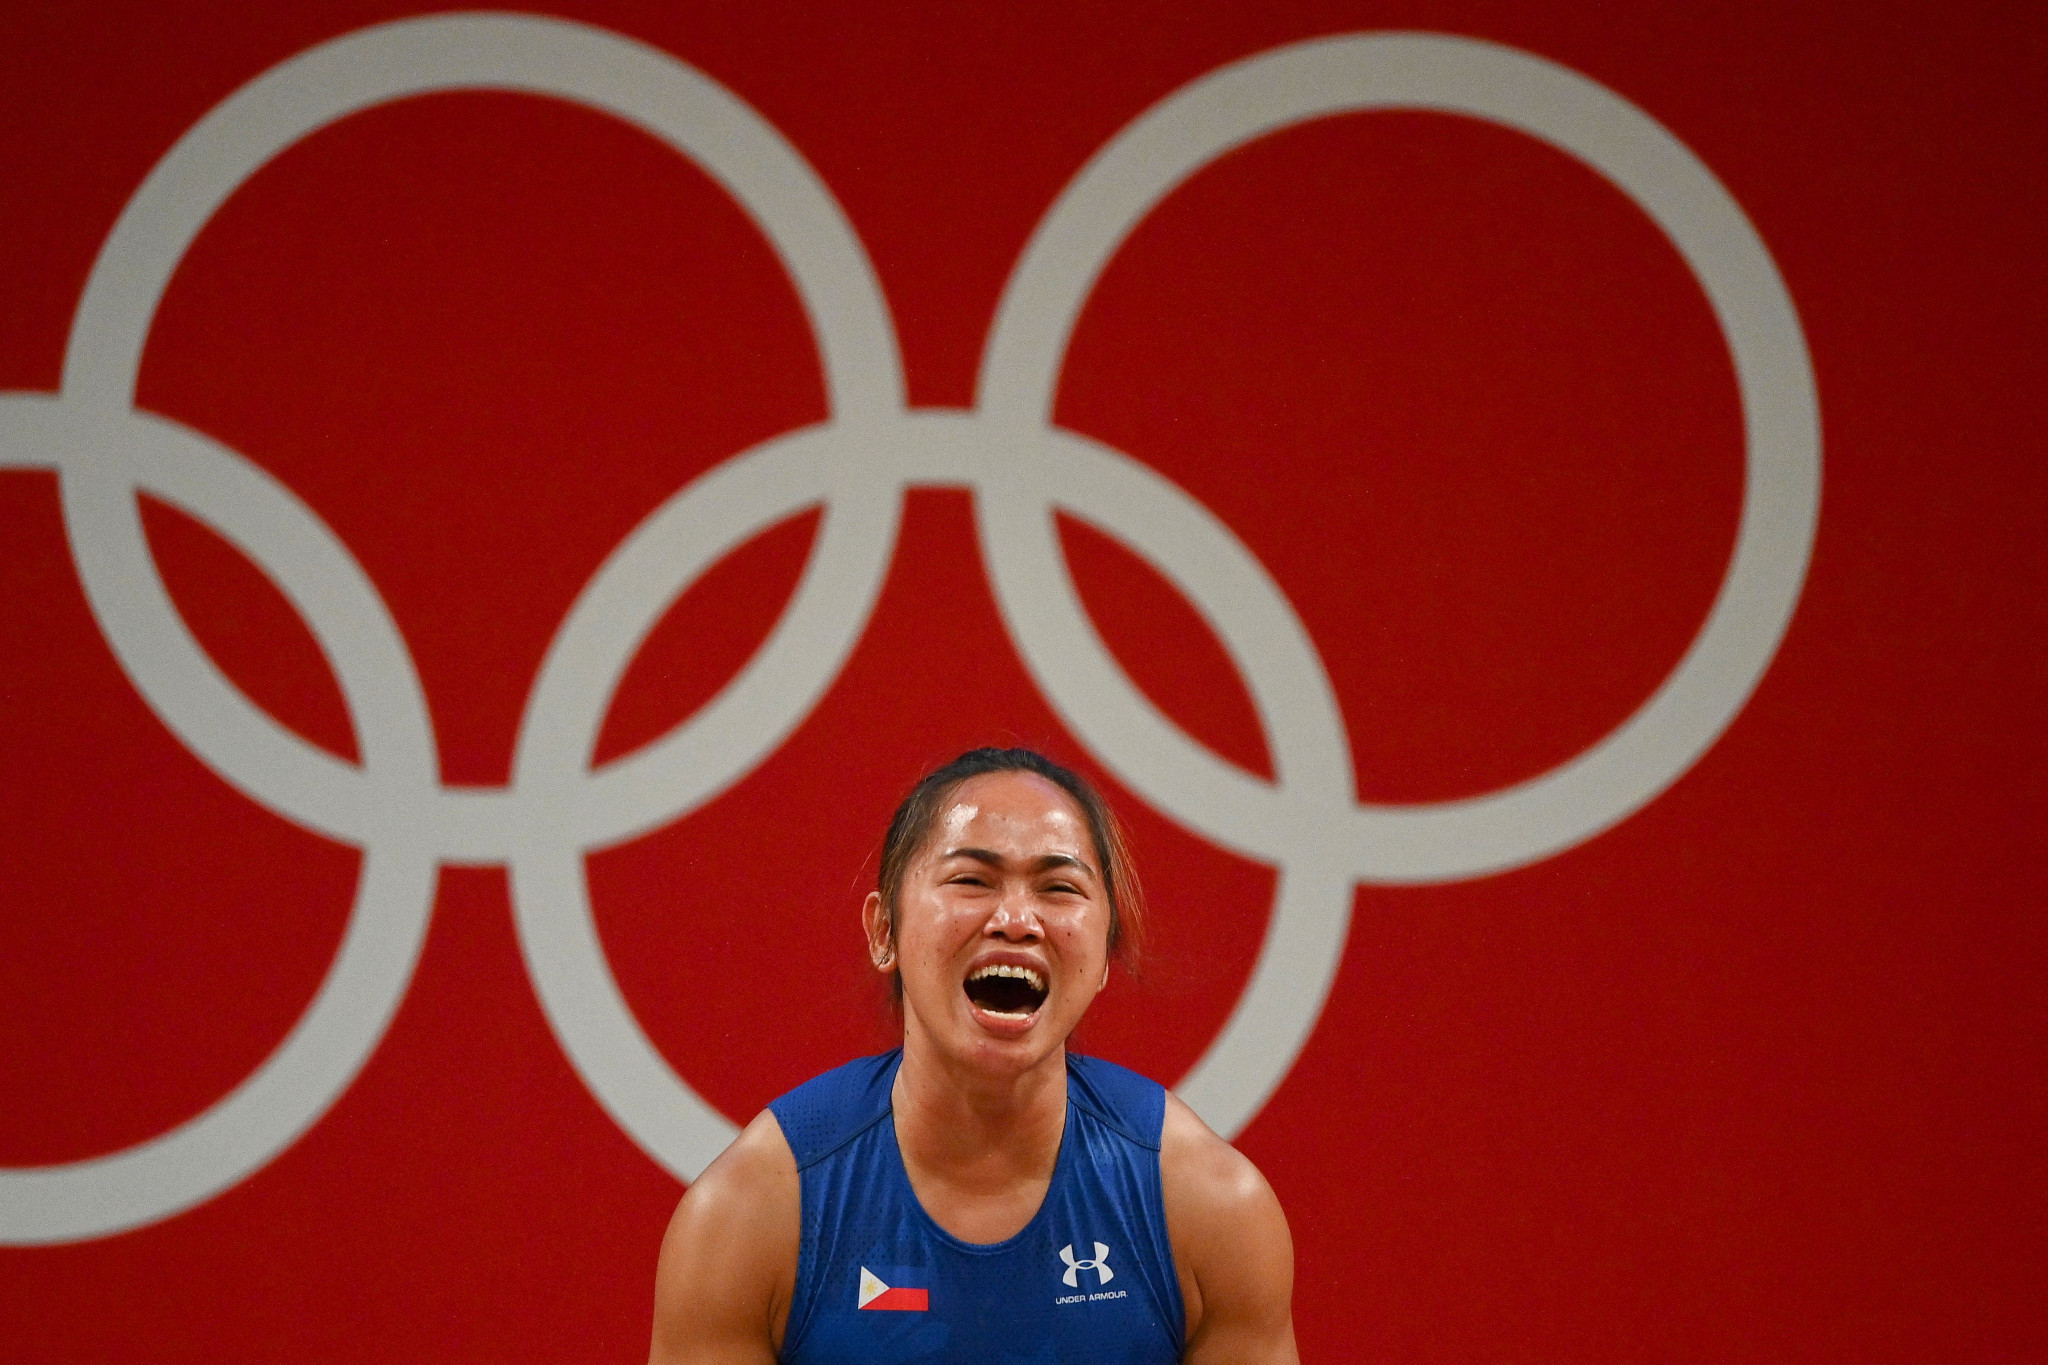 Hidilyn Diaz won Philippines its first Olympic gold medal at Tokyo 2020 ©Getty Images